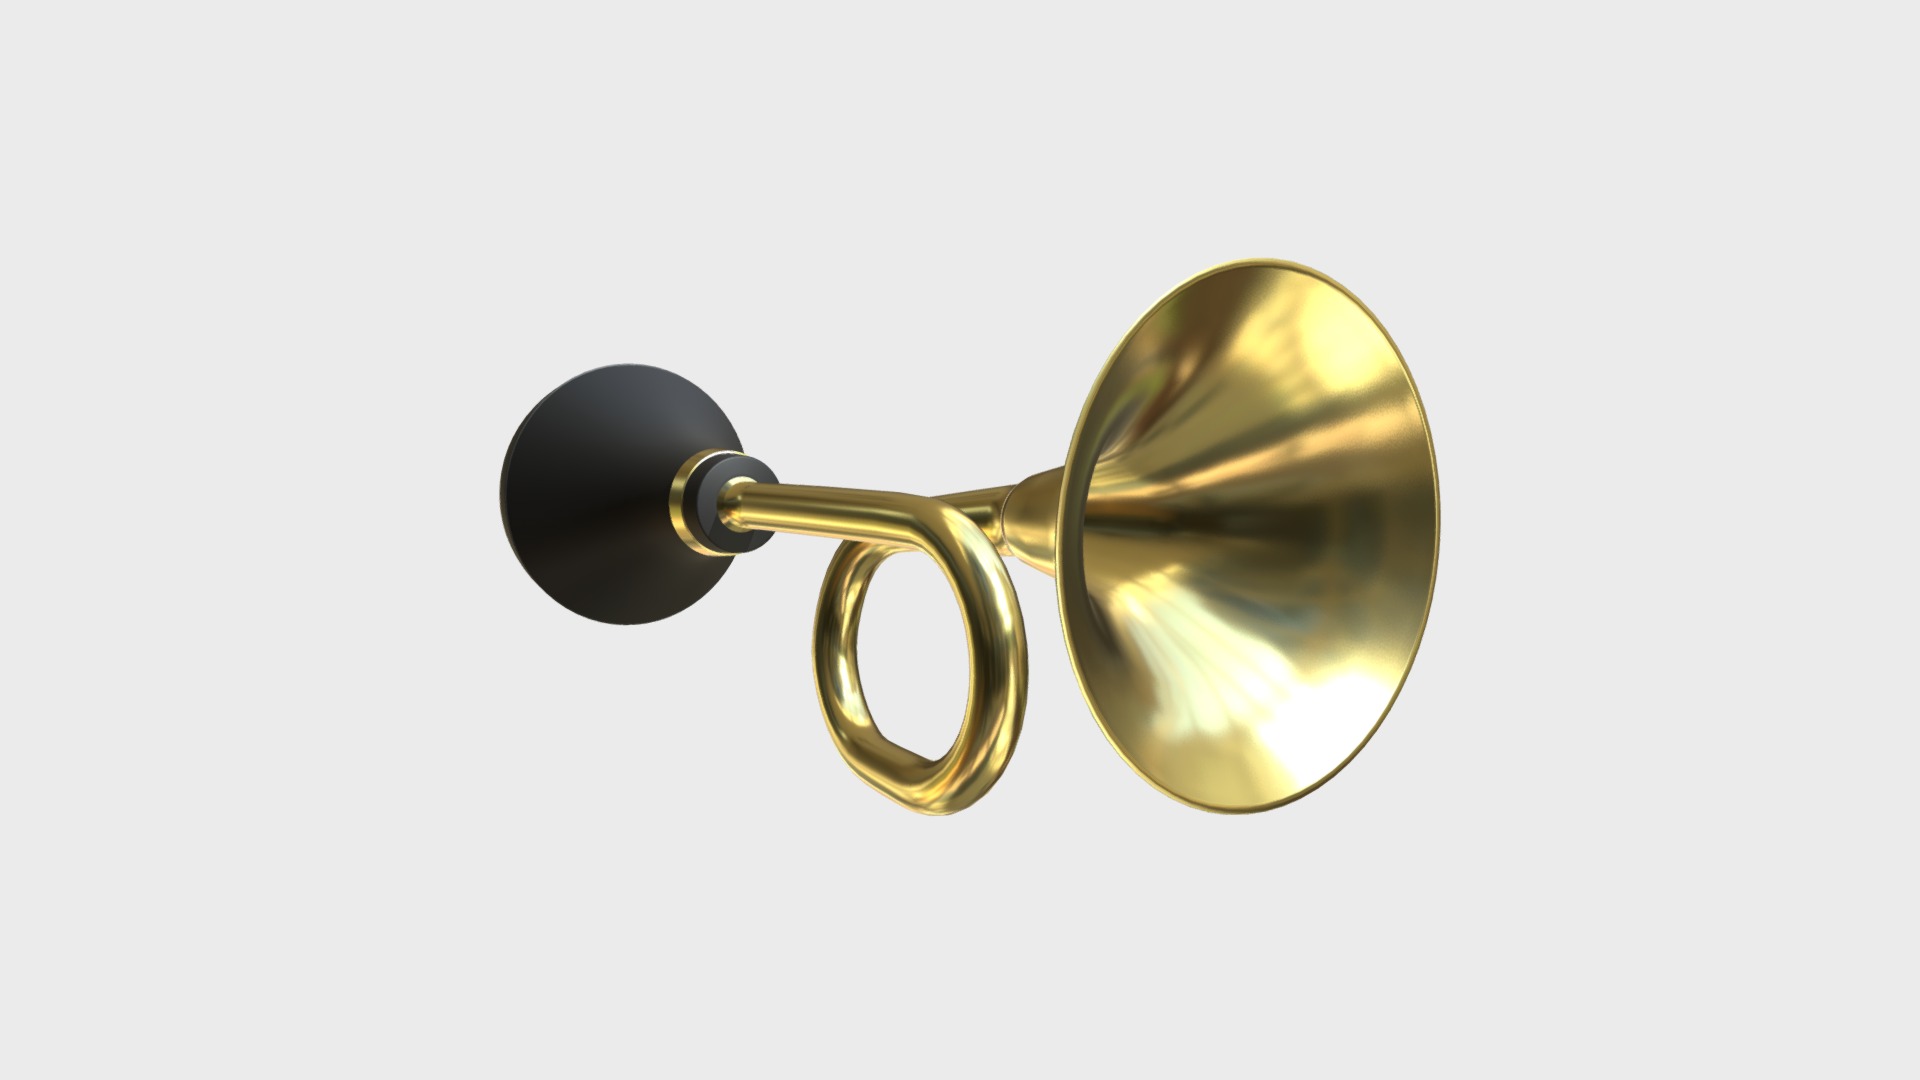 3D model Brass vehicle horn - This is a 3D model of the Brass vehicle horn. The 3D model is about a gold and black trumpet.